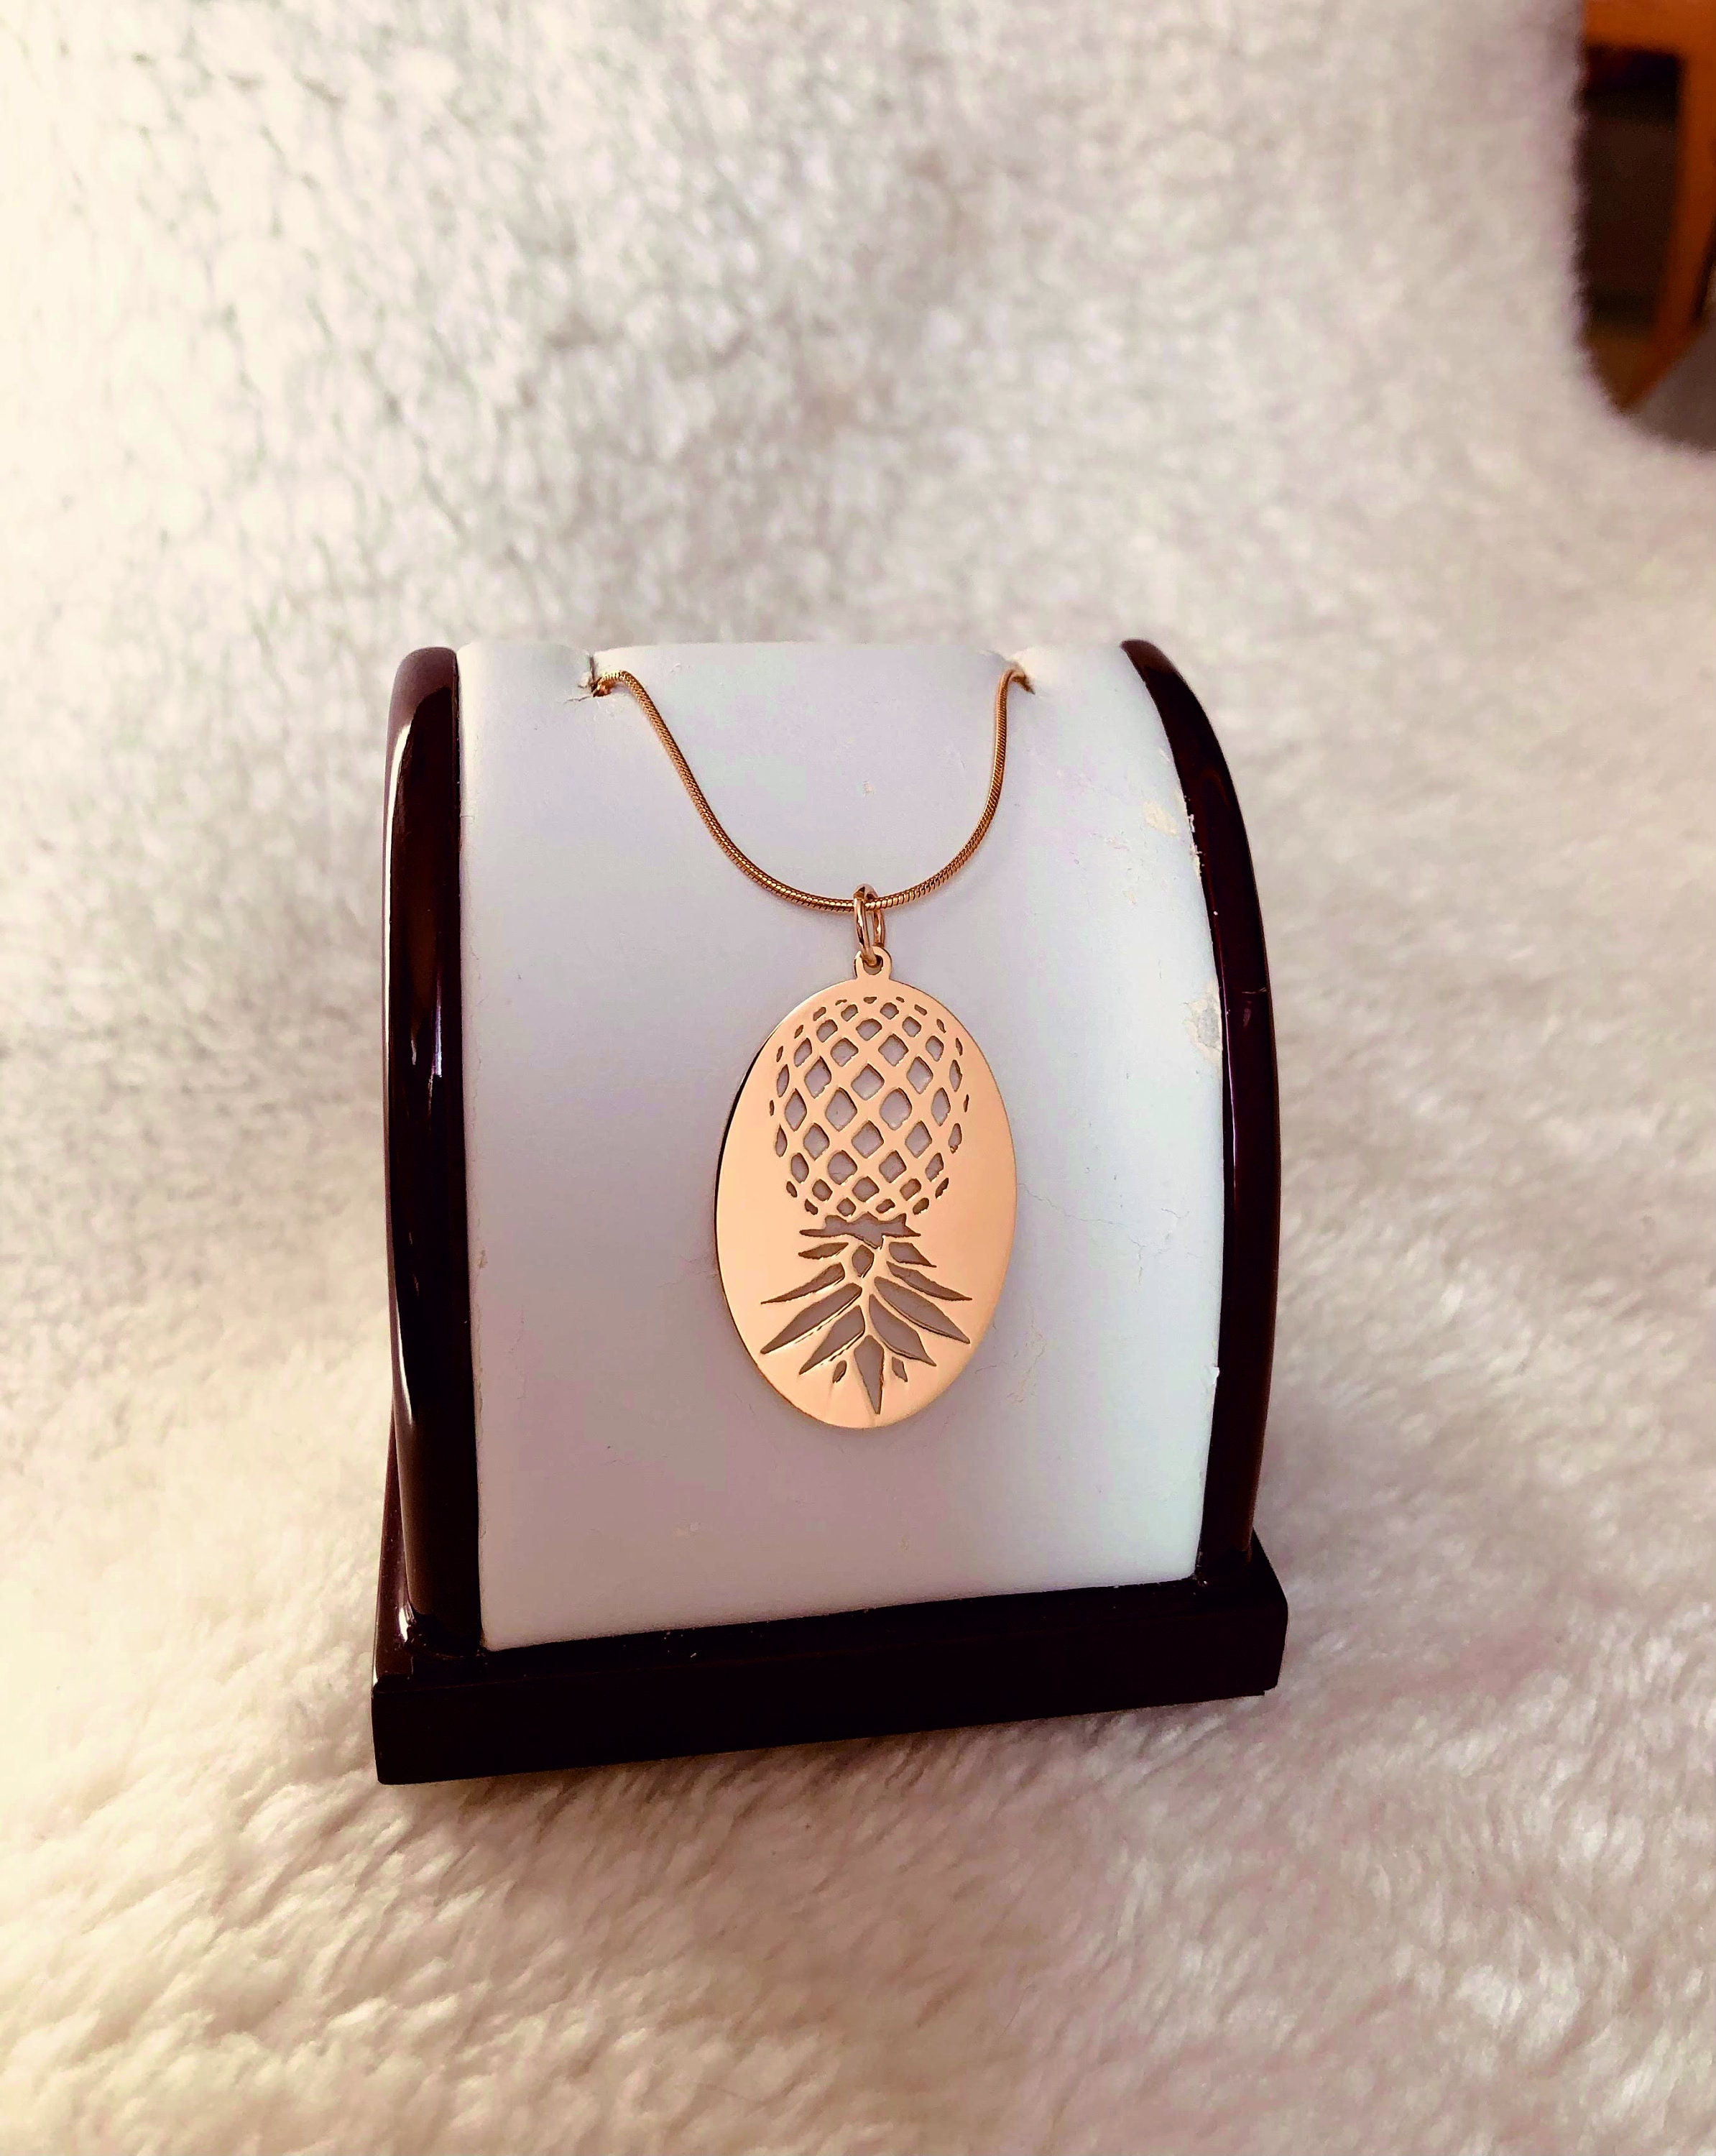 Goldfilled Pineapple Necklace With Golfilled Chain Swing Time photo